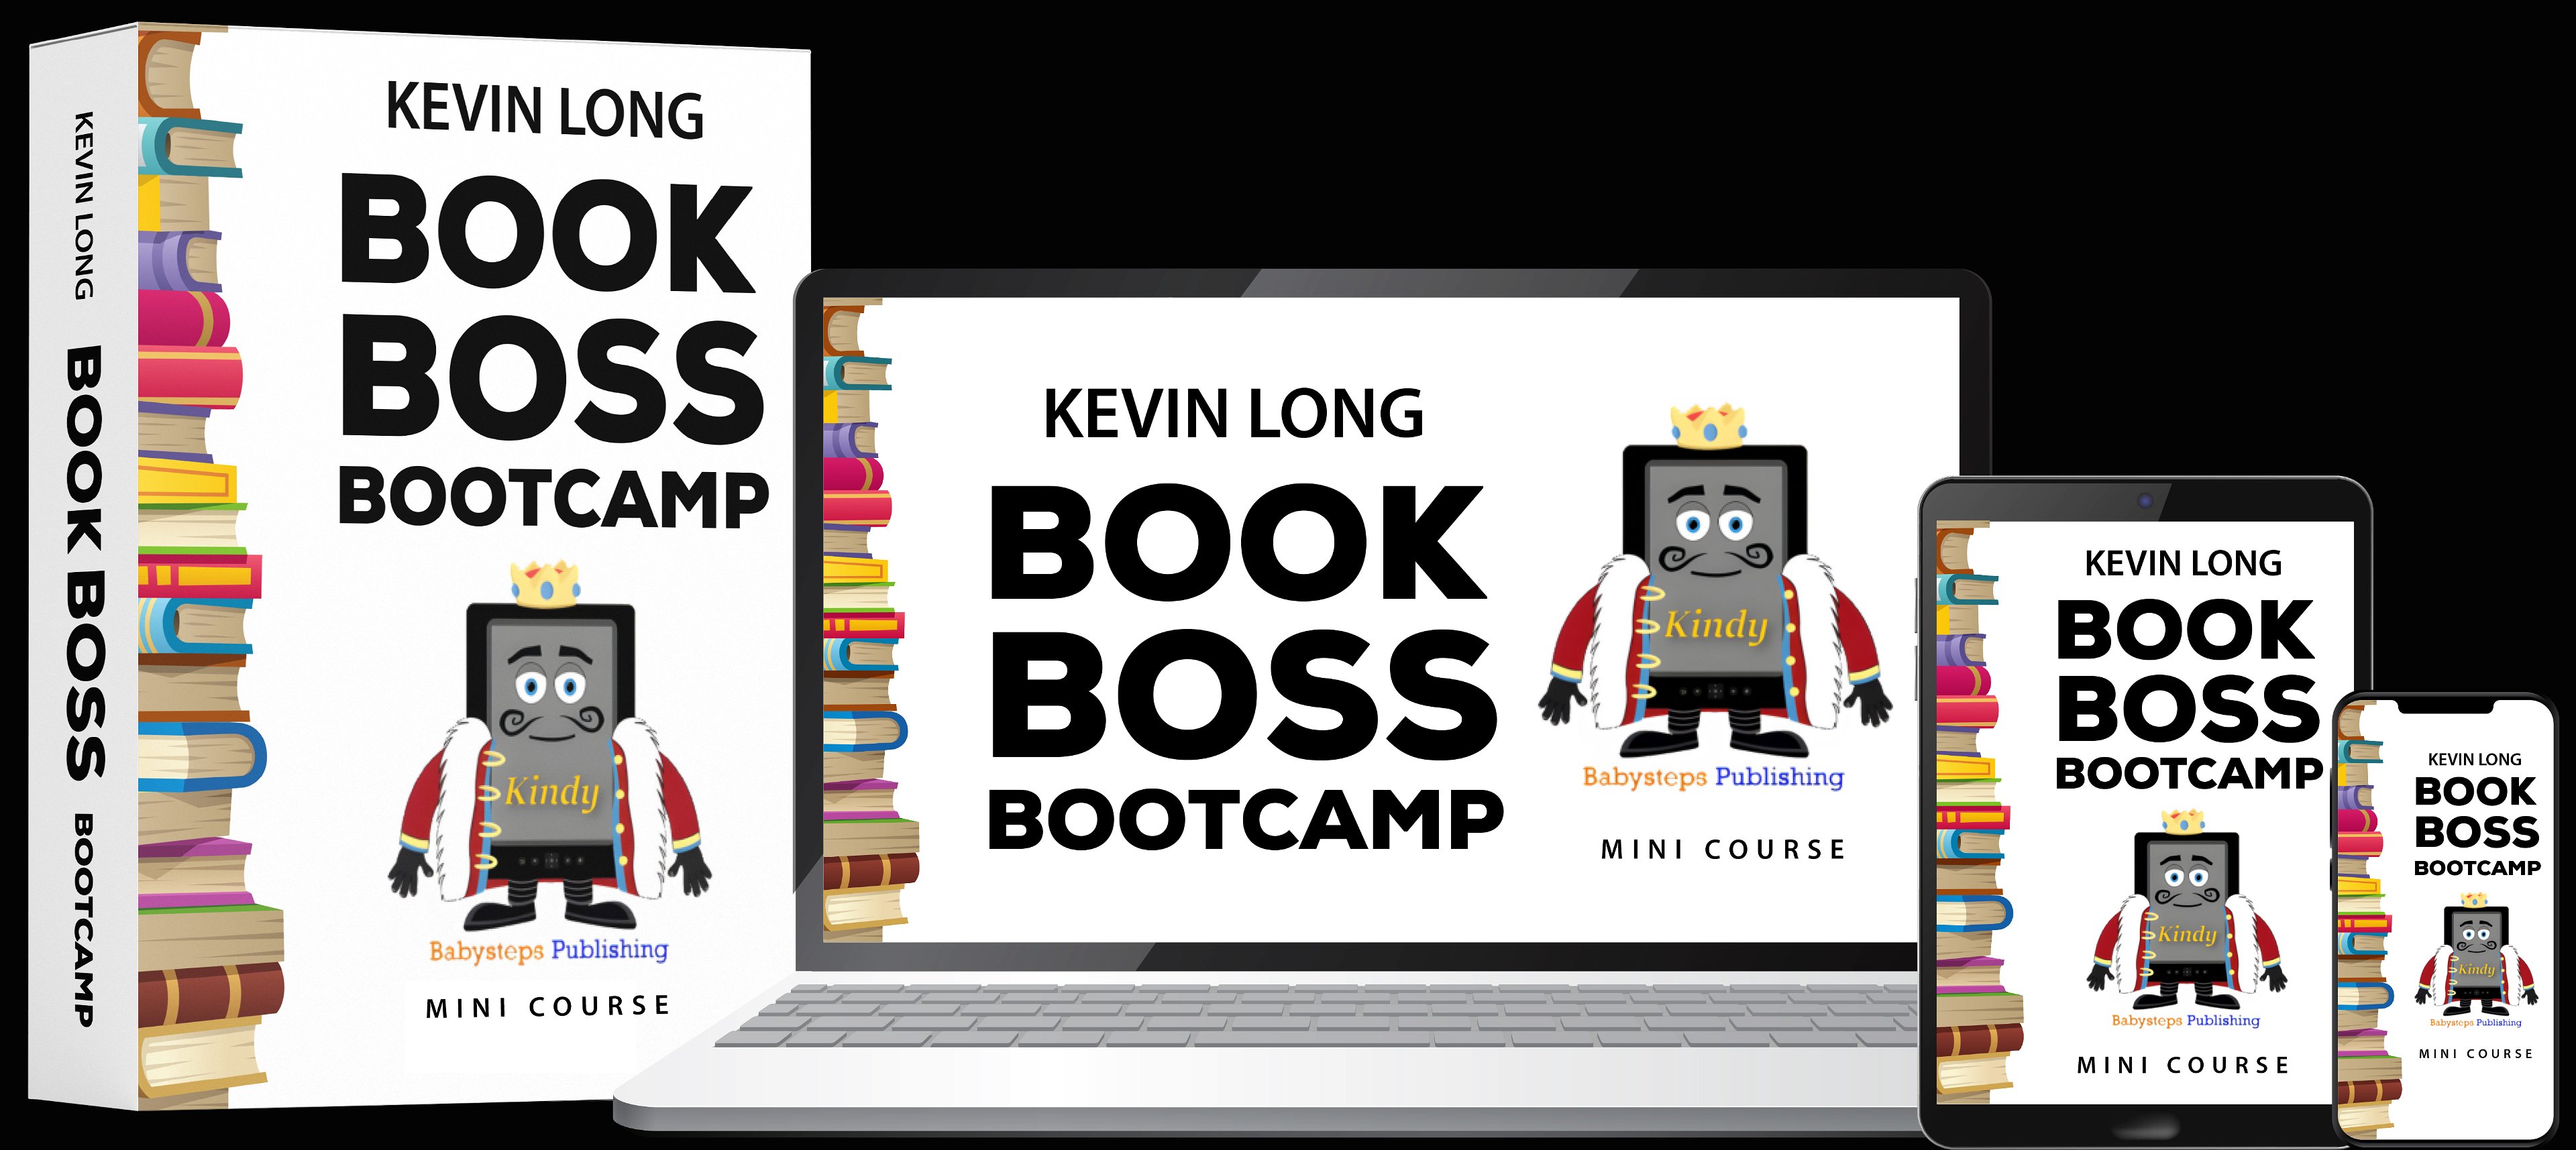 The Book Boss Bootcamp